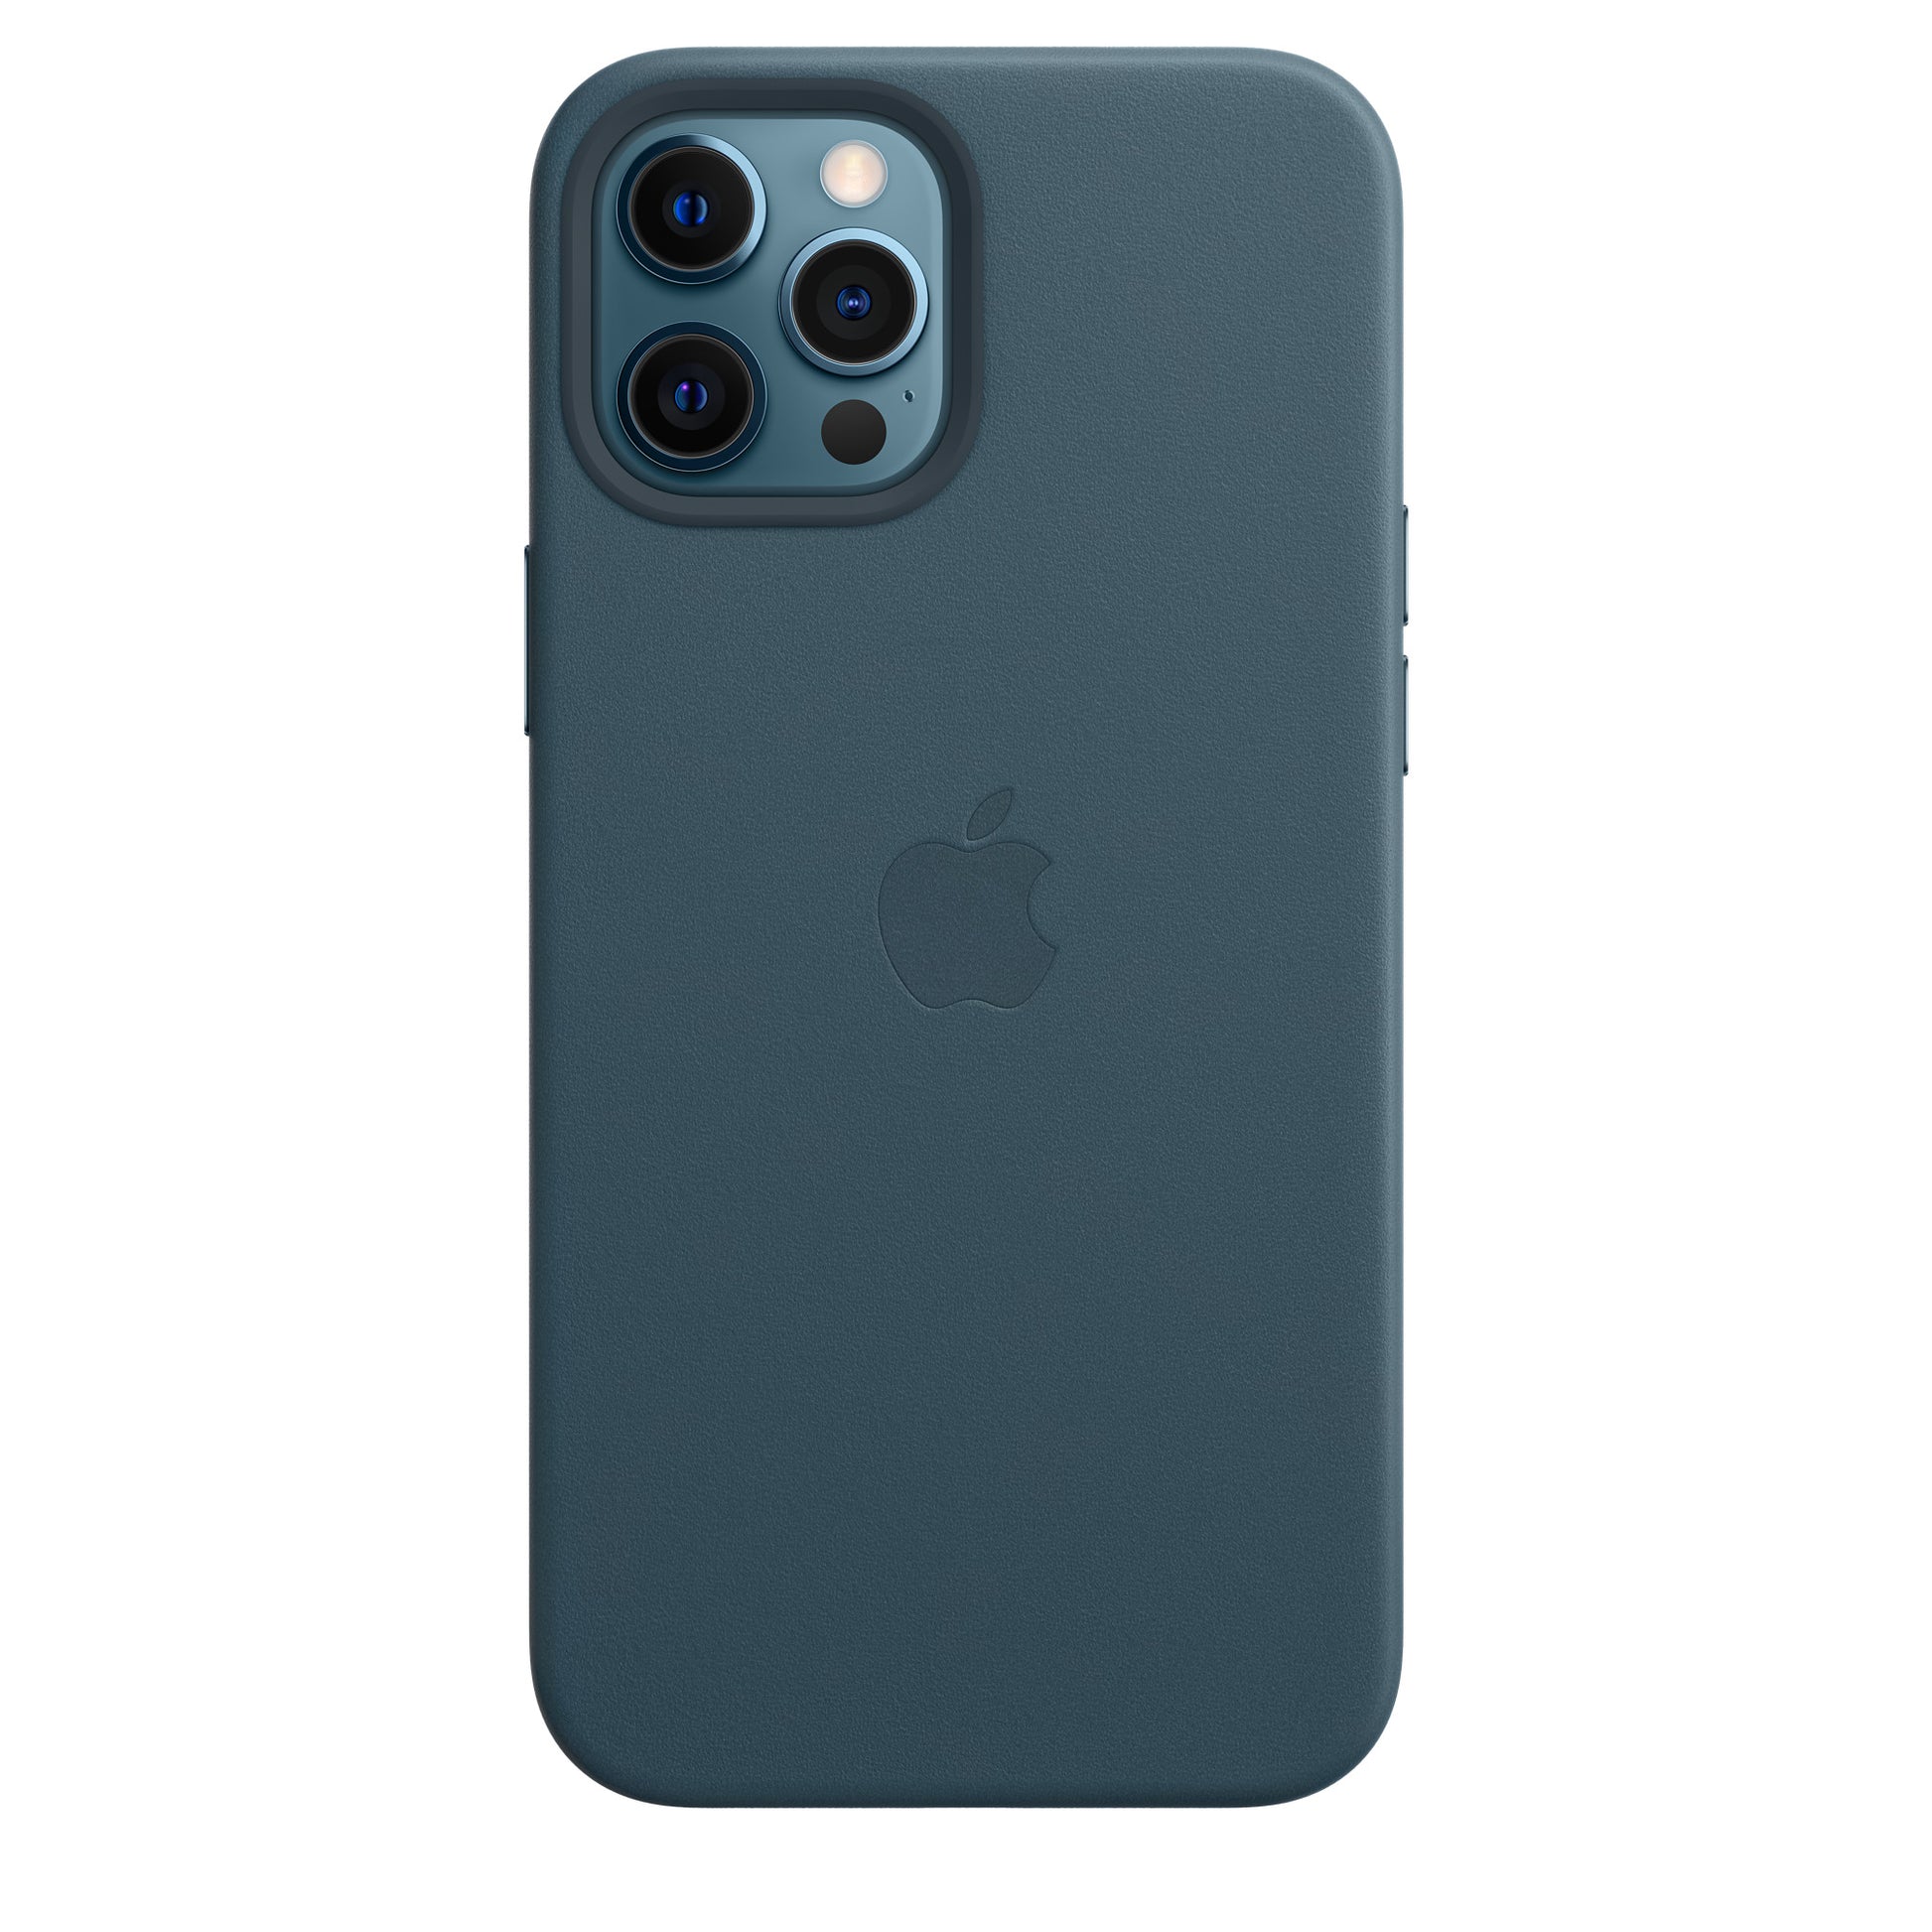 Apple iPhone 12 Pro Max Leather Case Deep Baltic Blue Baltic Blue New - Sealed